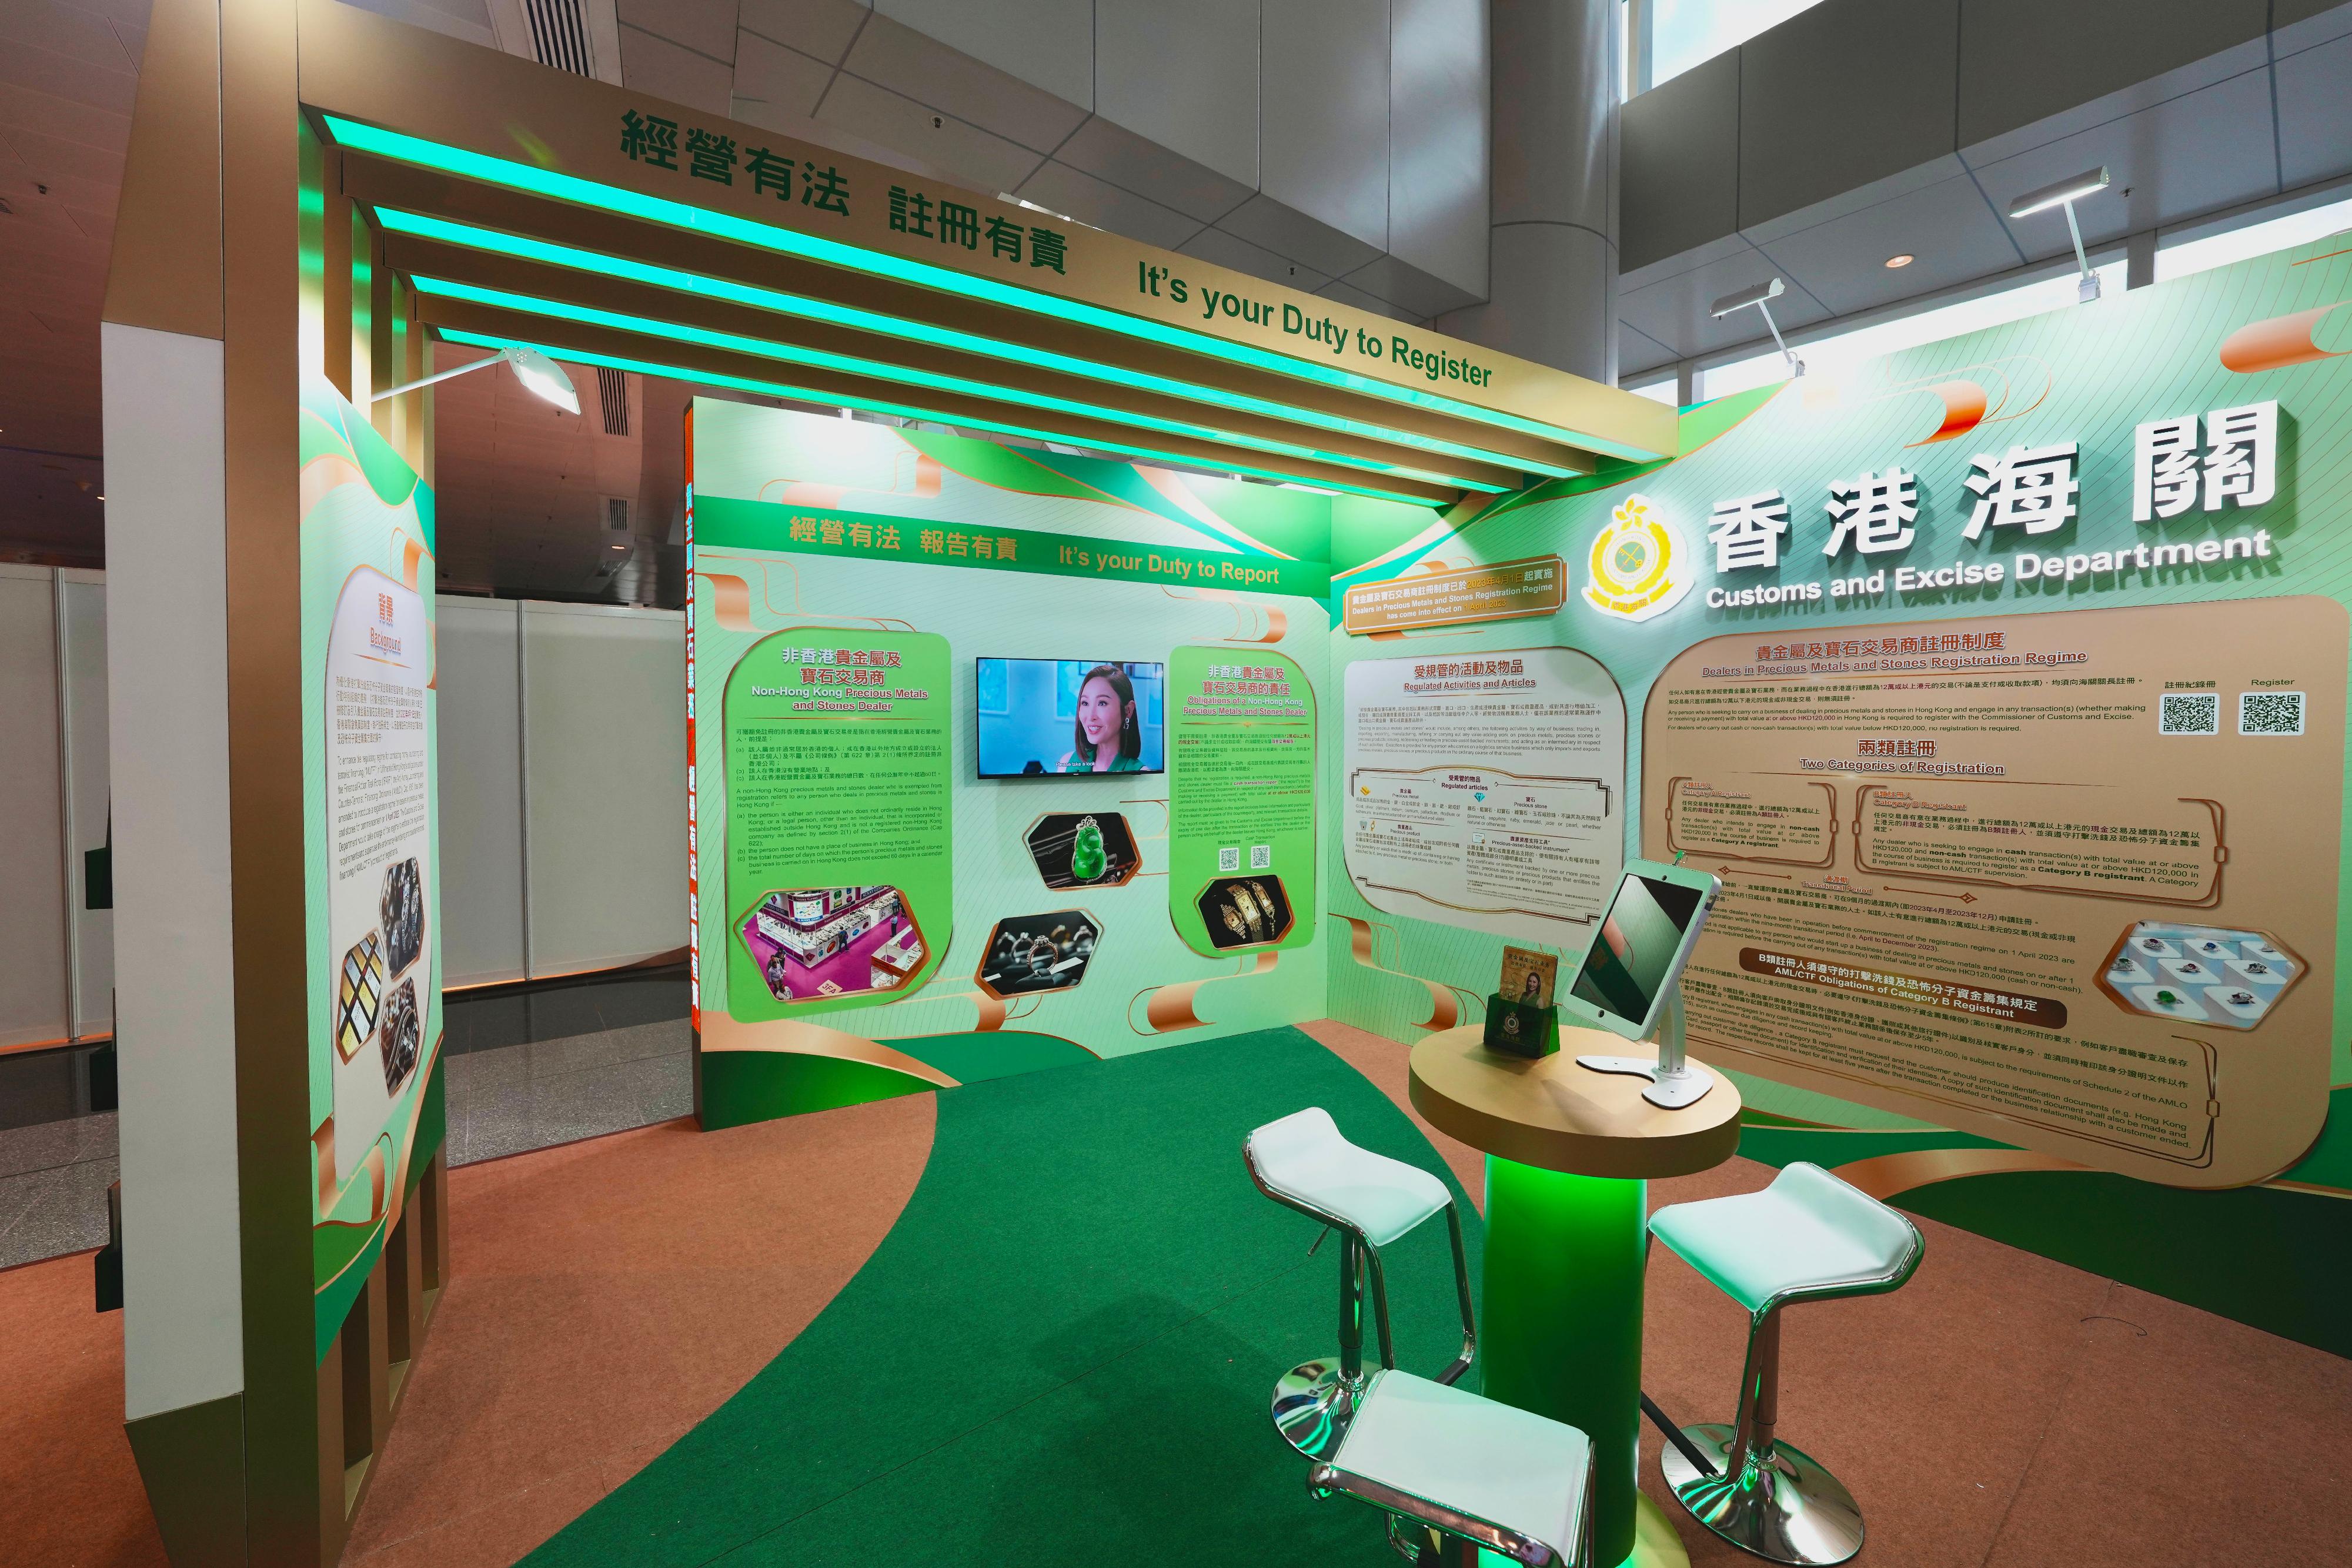 Hong Kong Customs will set up a booth at the JMA Hong Kong International Jewelry Show, to be held at the Hong Kong Convention and Exhibition Centre, from tomorrow (November 30) for four consecutive days to publicise the Dealers in Precious Metals and Stones Regulatory Regime, and will provide on-site counter services to assist non-Hong Kong dealers in submitting a cash transaction report during their participation in the exhibition. Photo shows the Hong Kong Customs' booth.